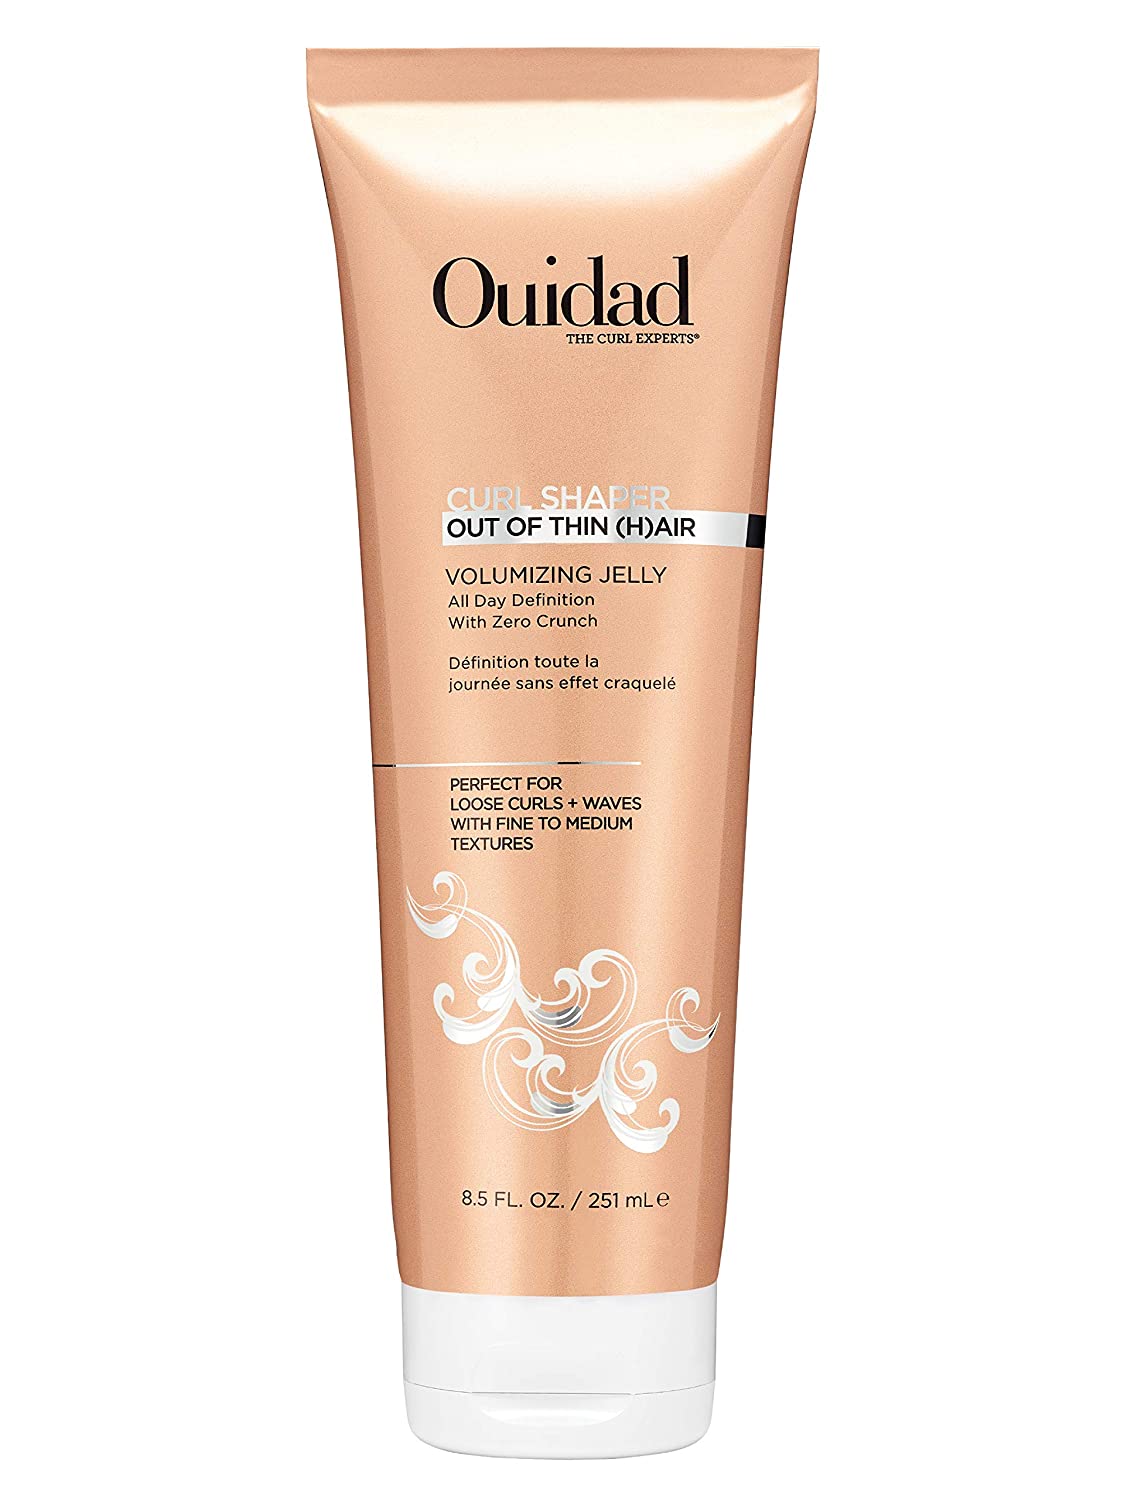 Ouidad Curl Shaper™ Out Of Thin (H)air Volumizing Jelly 8.5 oz (Buy 3 Get 1 Free Mix & Match)